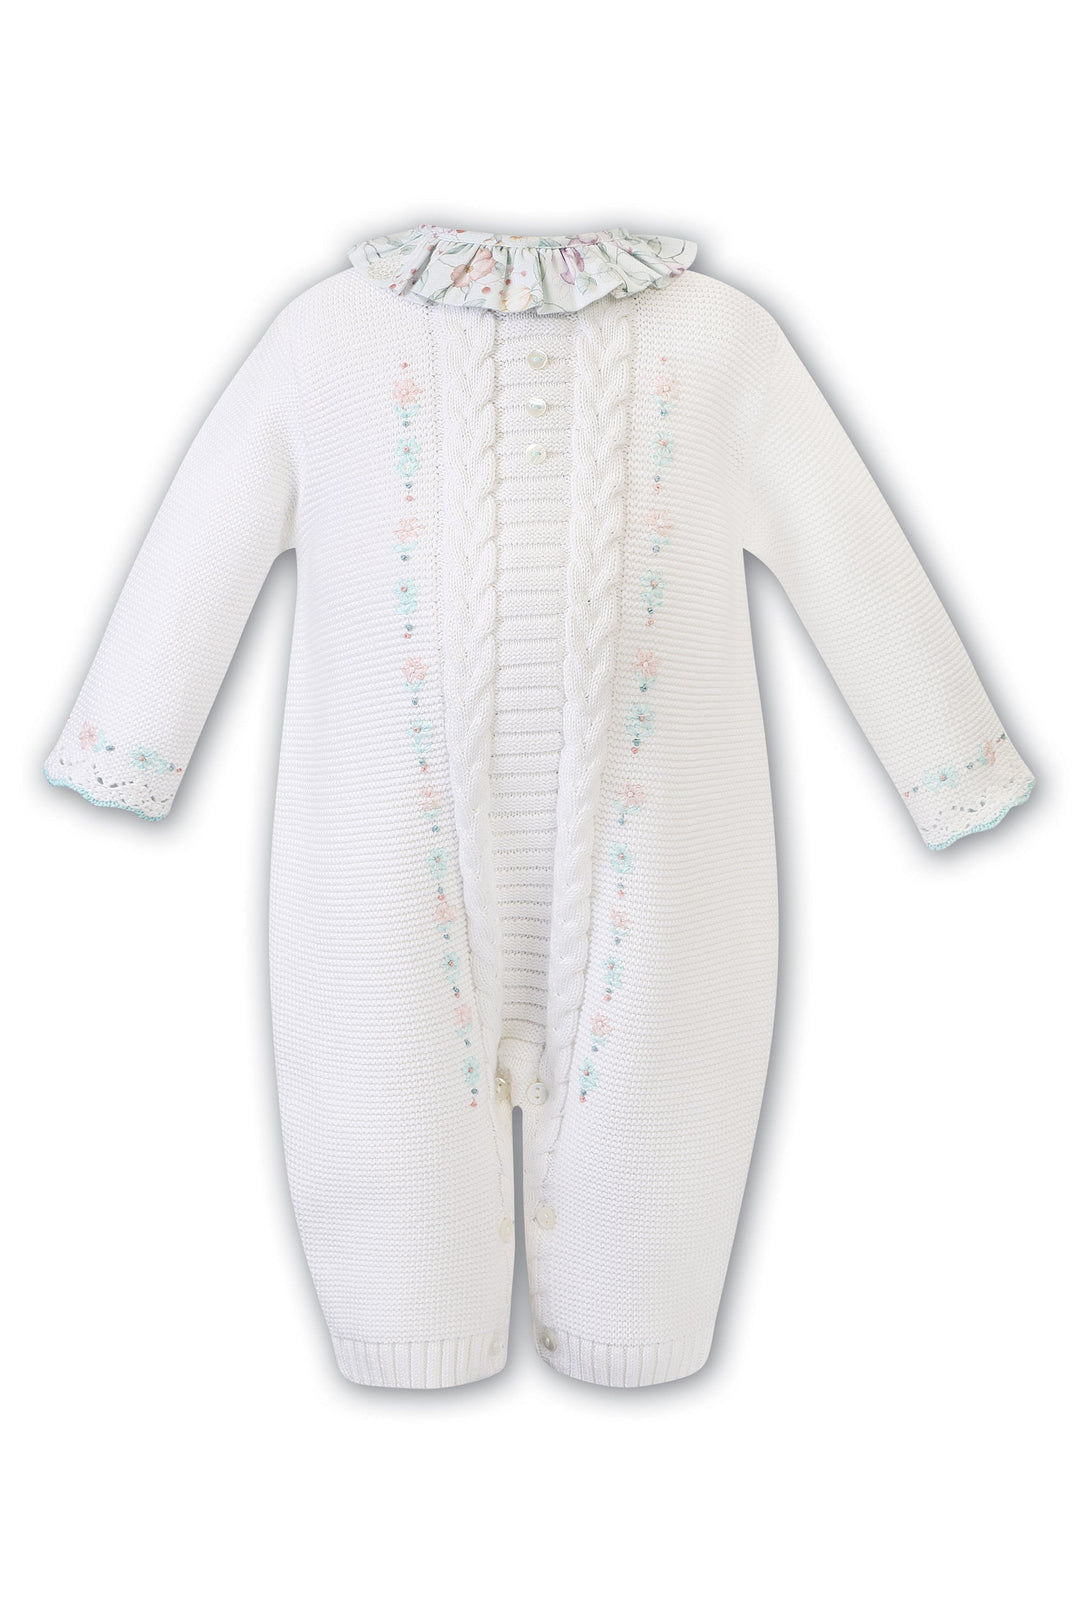 Sarah Louise "Madeline" Ivory & Mint Floral Knitted Romper | Millie and John